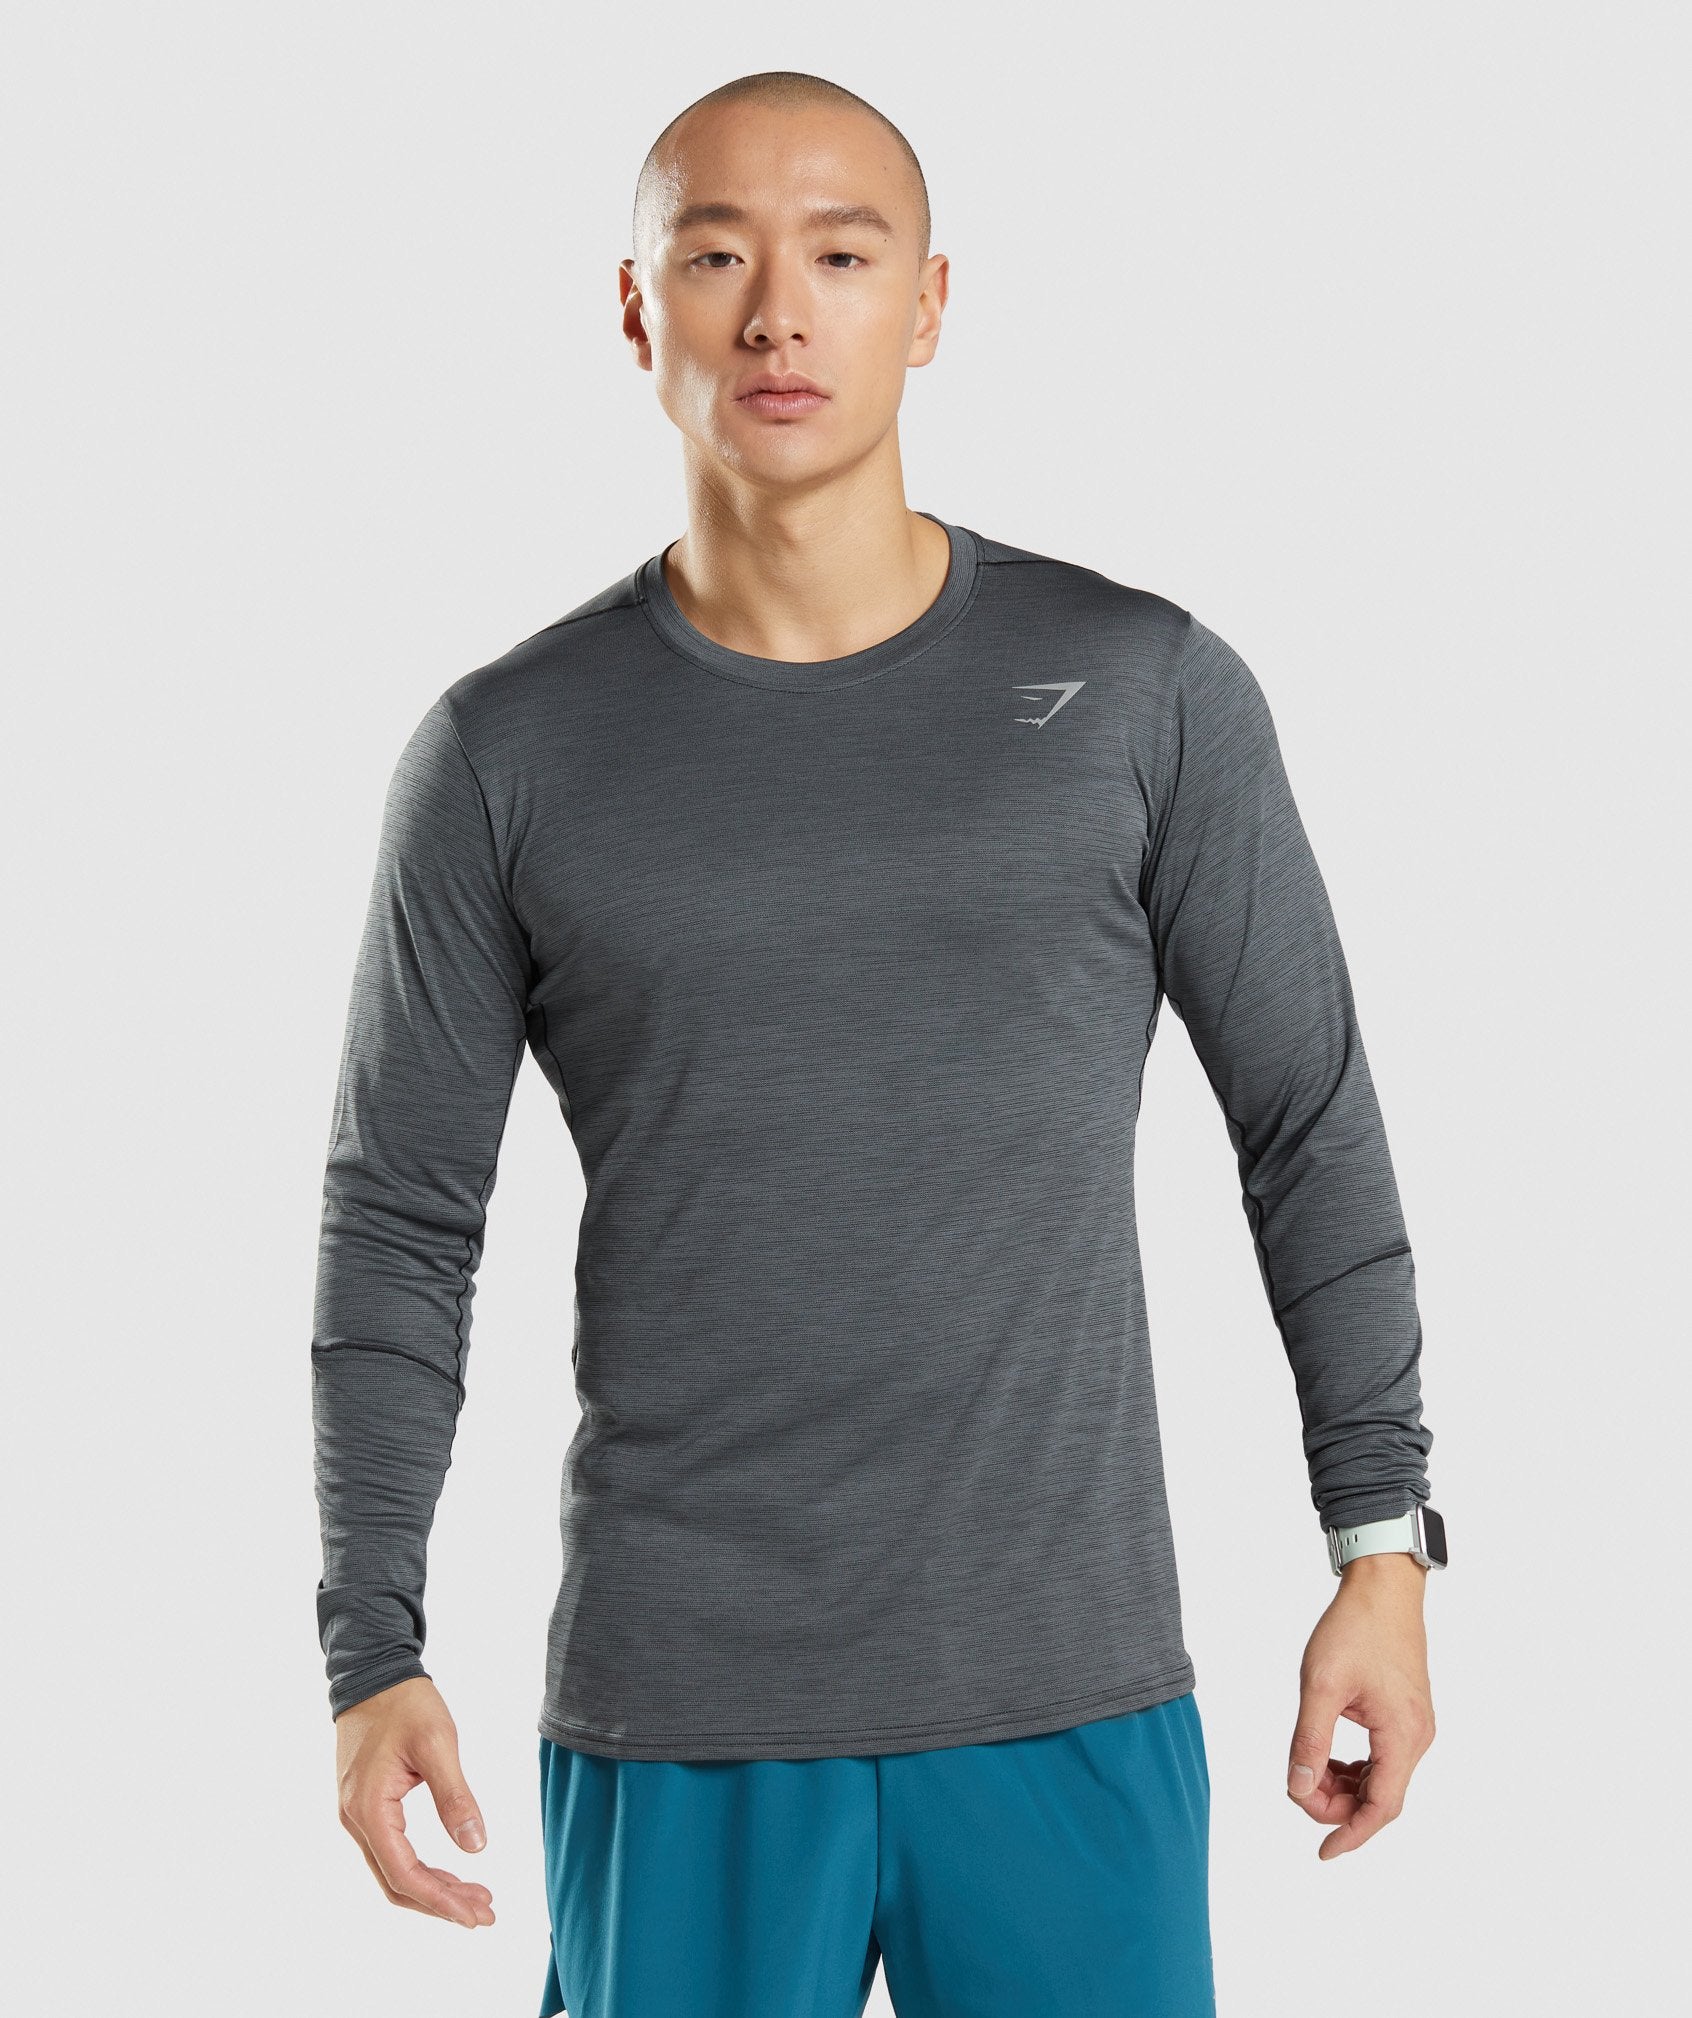 Speed Long Sleeve T-Shirt in Black/Charcoal Marl - view 1